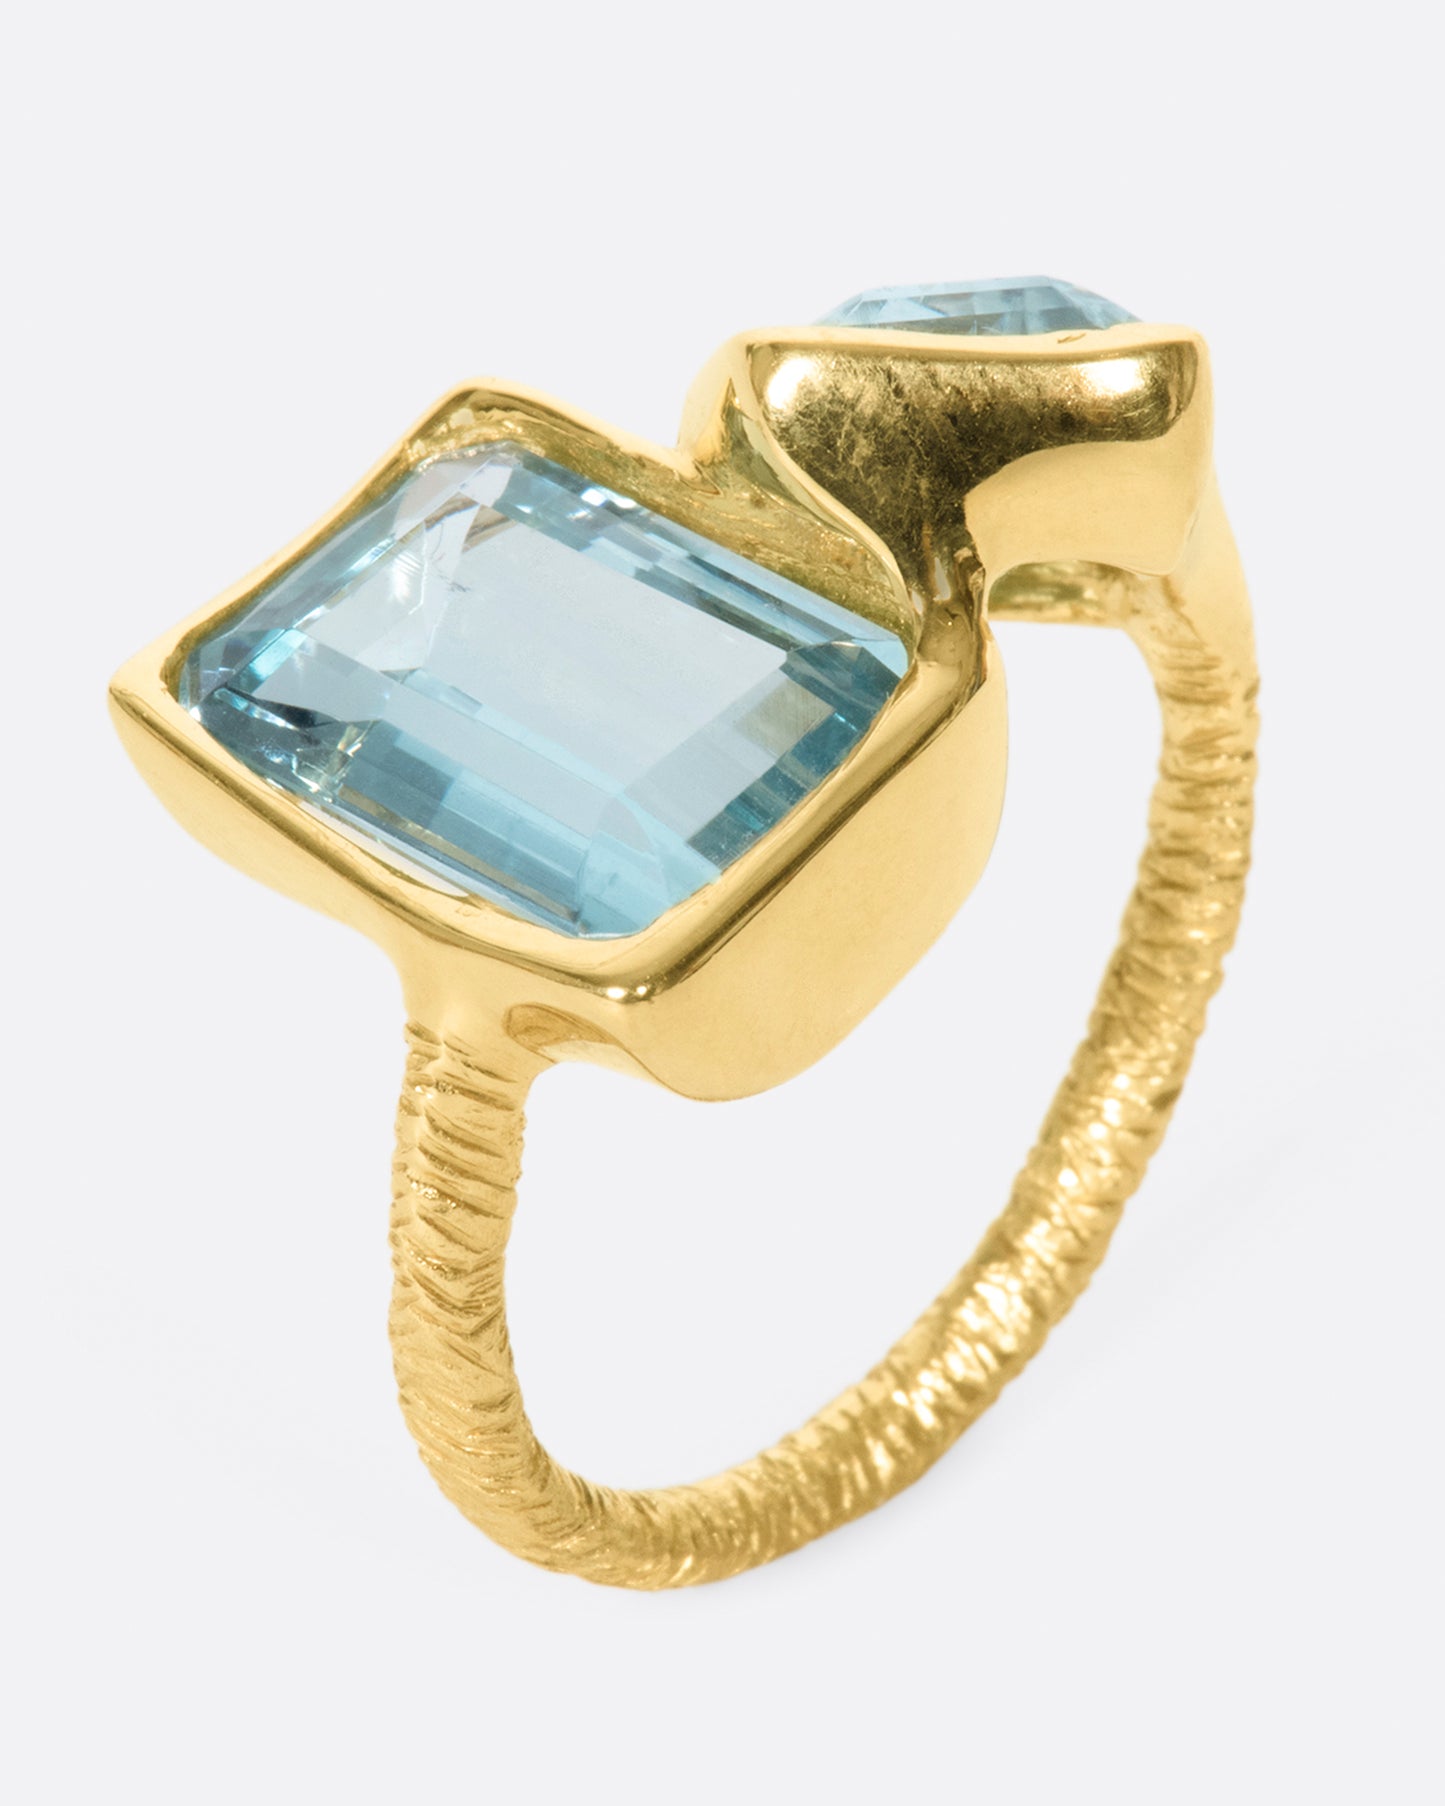 A yellow gold ring featuring two large emerald cut aquamarines set slightly askew